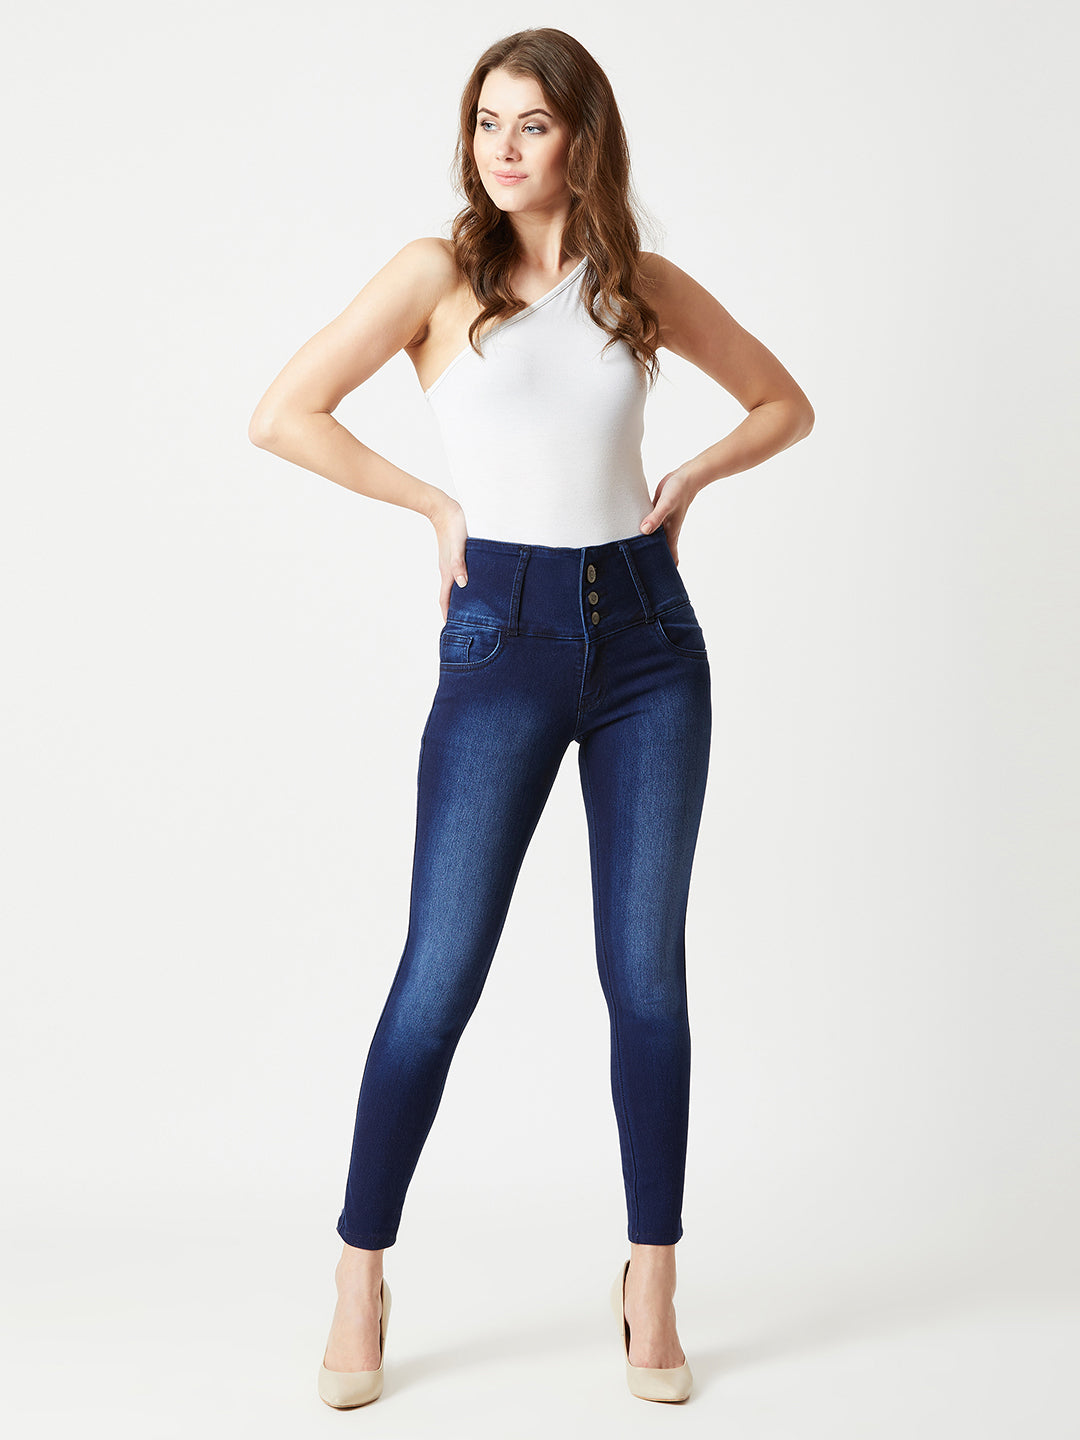 Women's Navy Blue Skinny Fit High Rise Clean Look Cropped Length Stretchable High Waist Denim Jeans